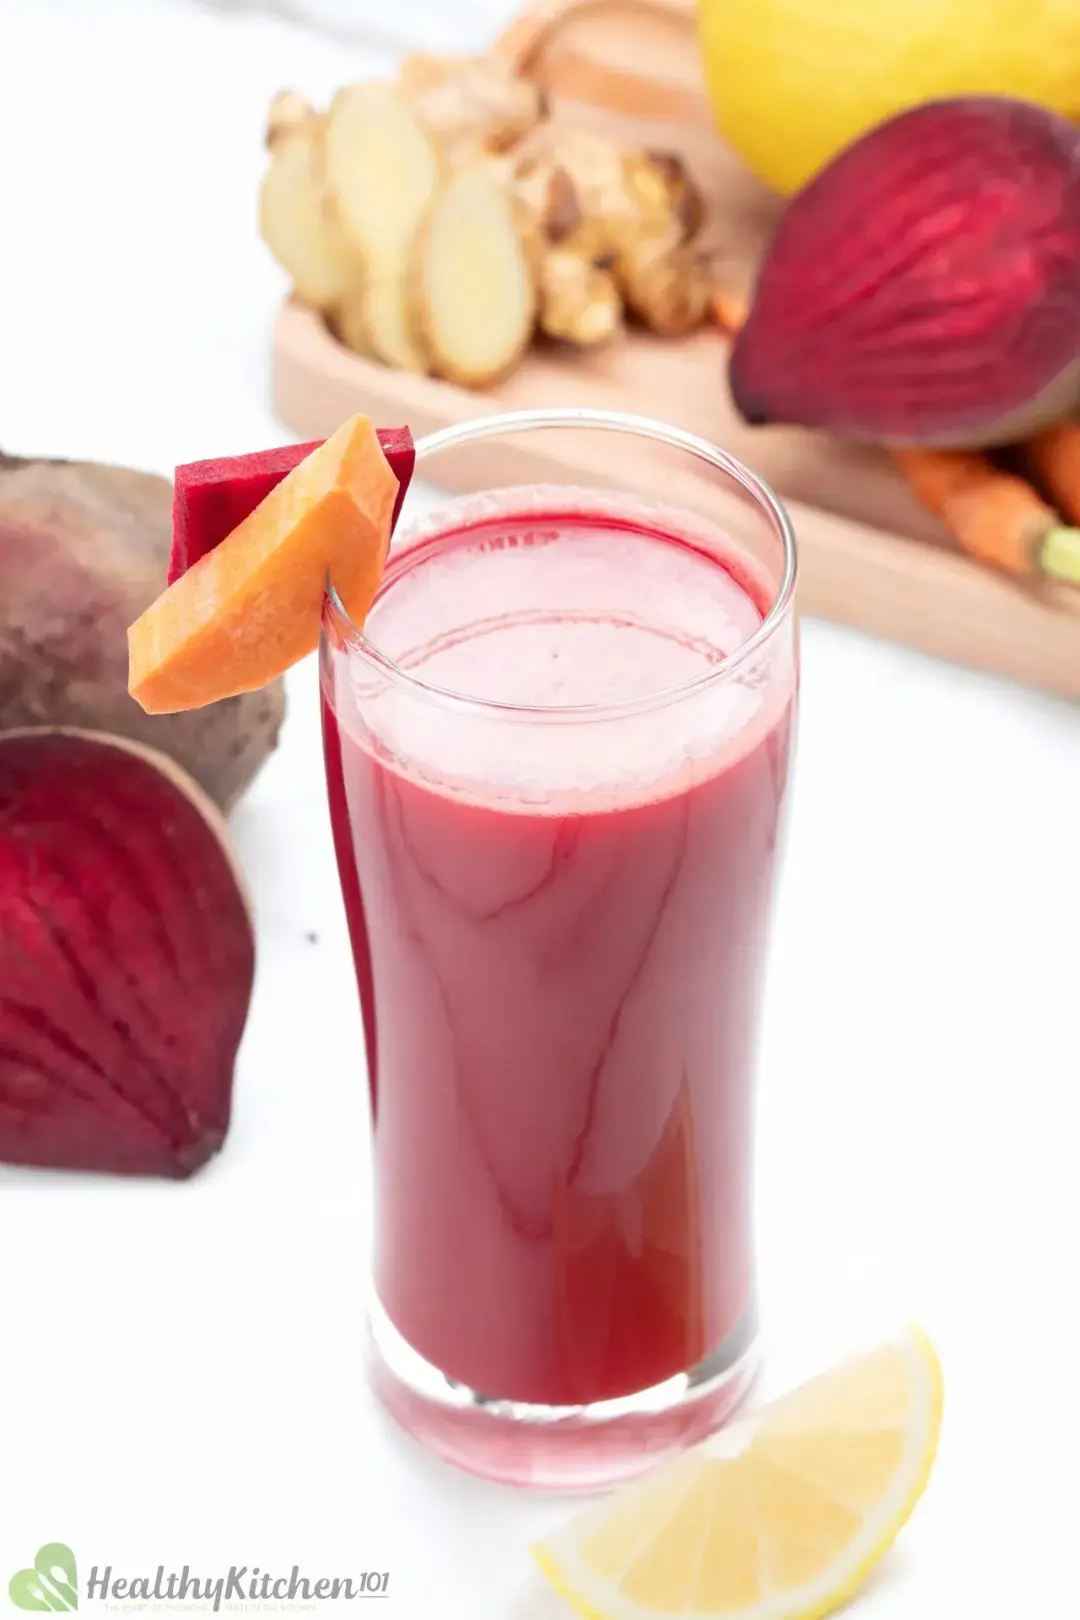 A tall glass of beetroot drink garnished with carrot slices, beetroot half, lemon wedges, and ginger knobs